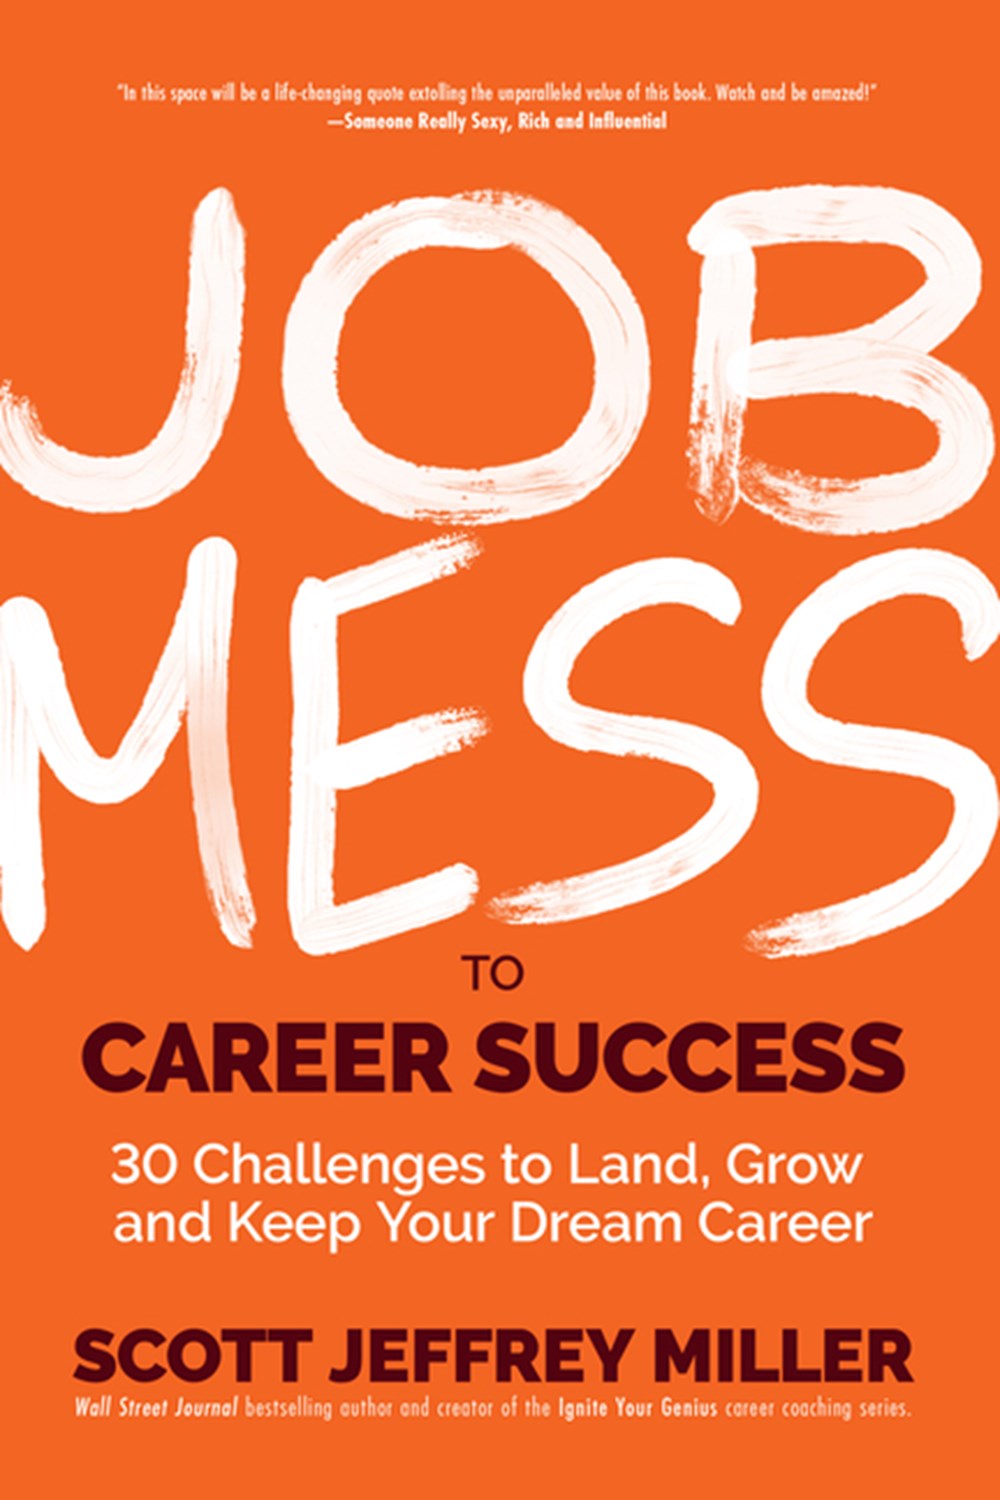 Job Mess to Career Success 30 Challenges to Land, Grow and Keep Your Dream Career